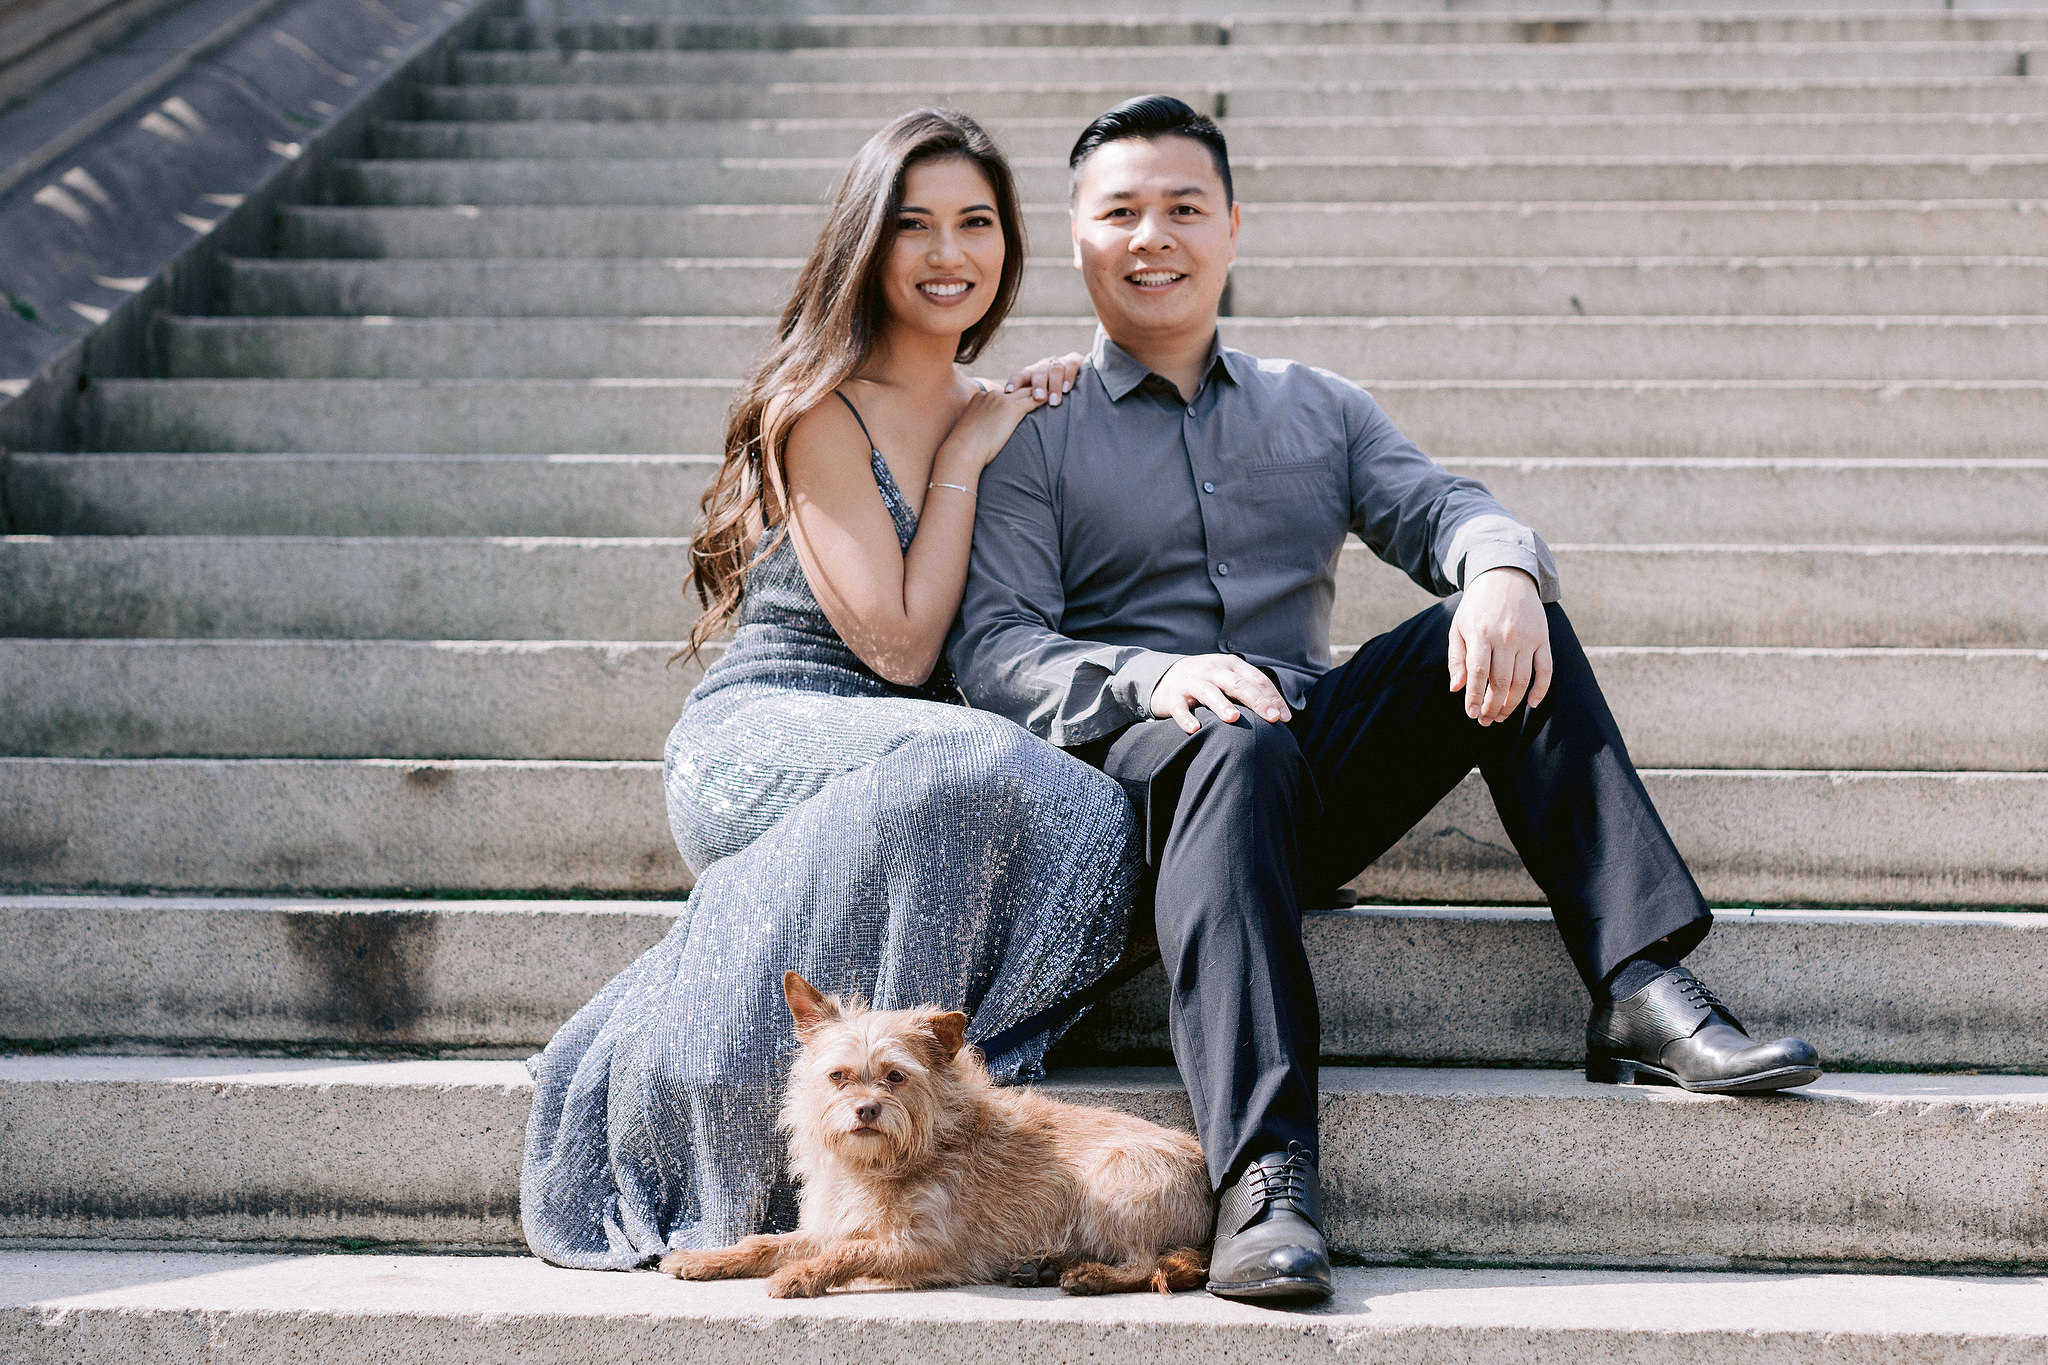 The engaged couple is at NY Central Park with their pet. Engagement session with pets photo by Jenny Fu Studio.